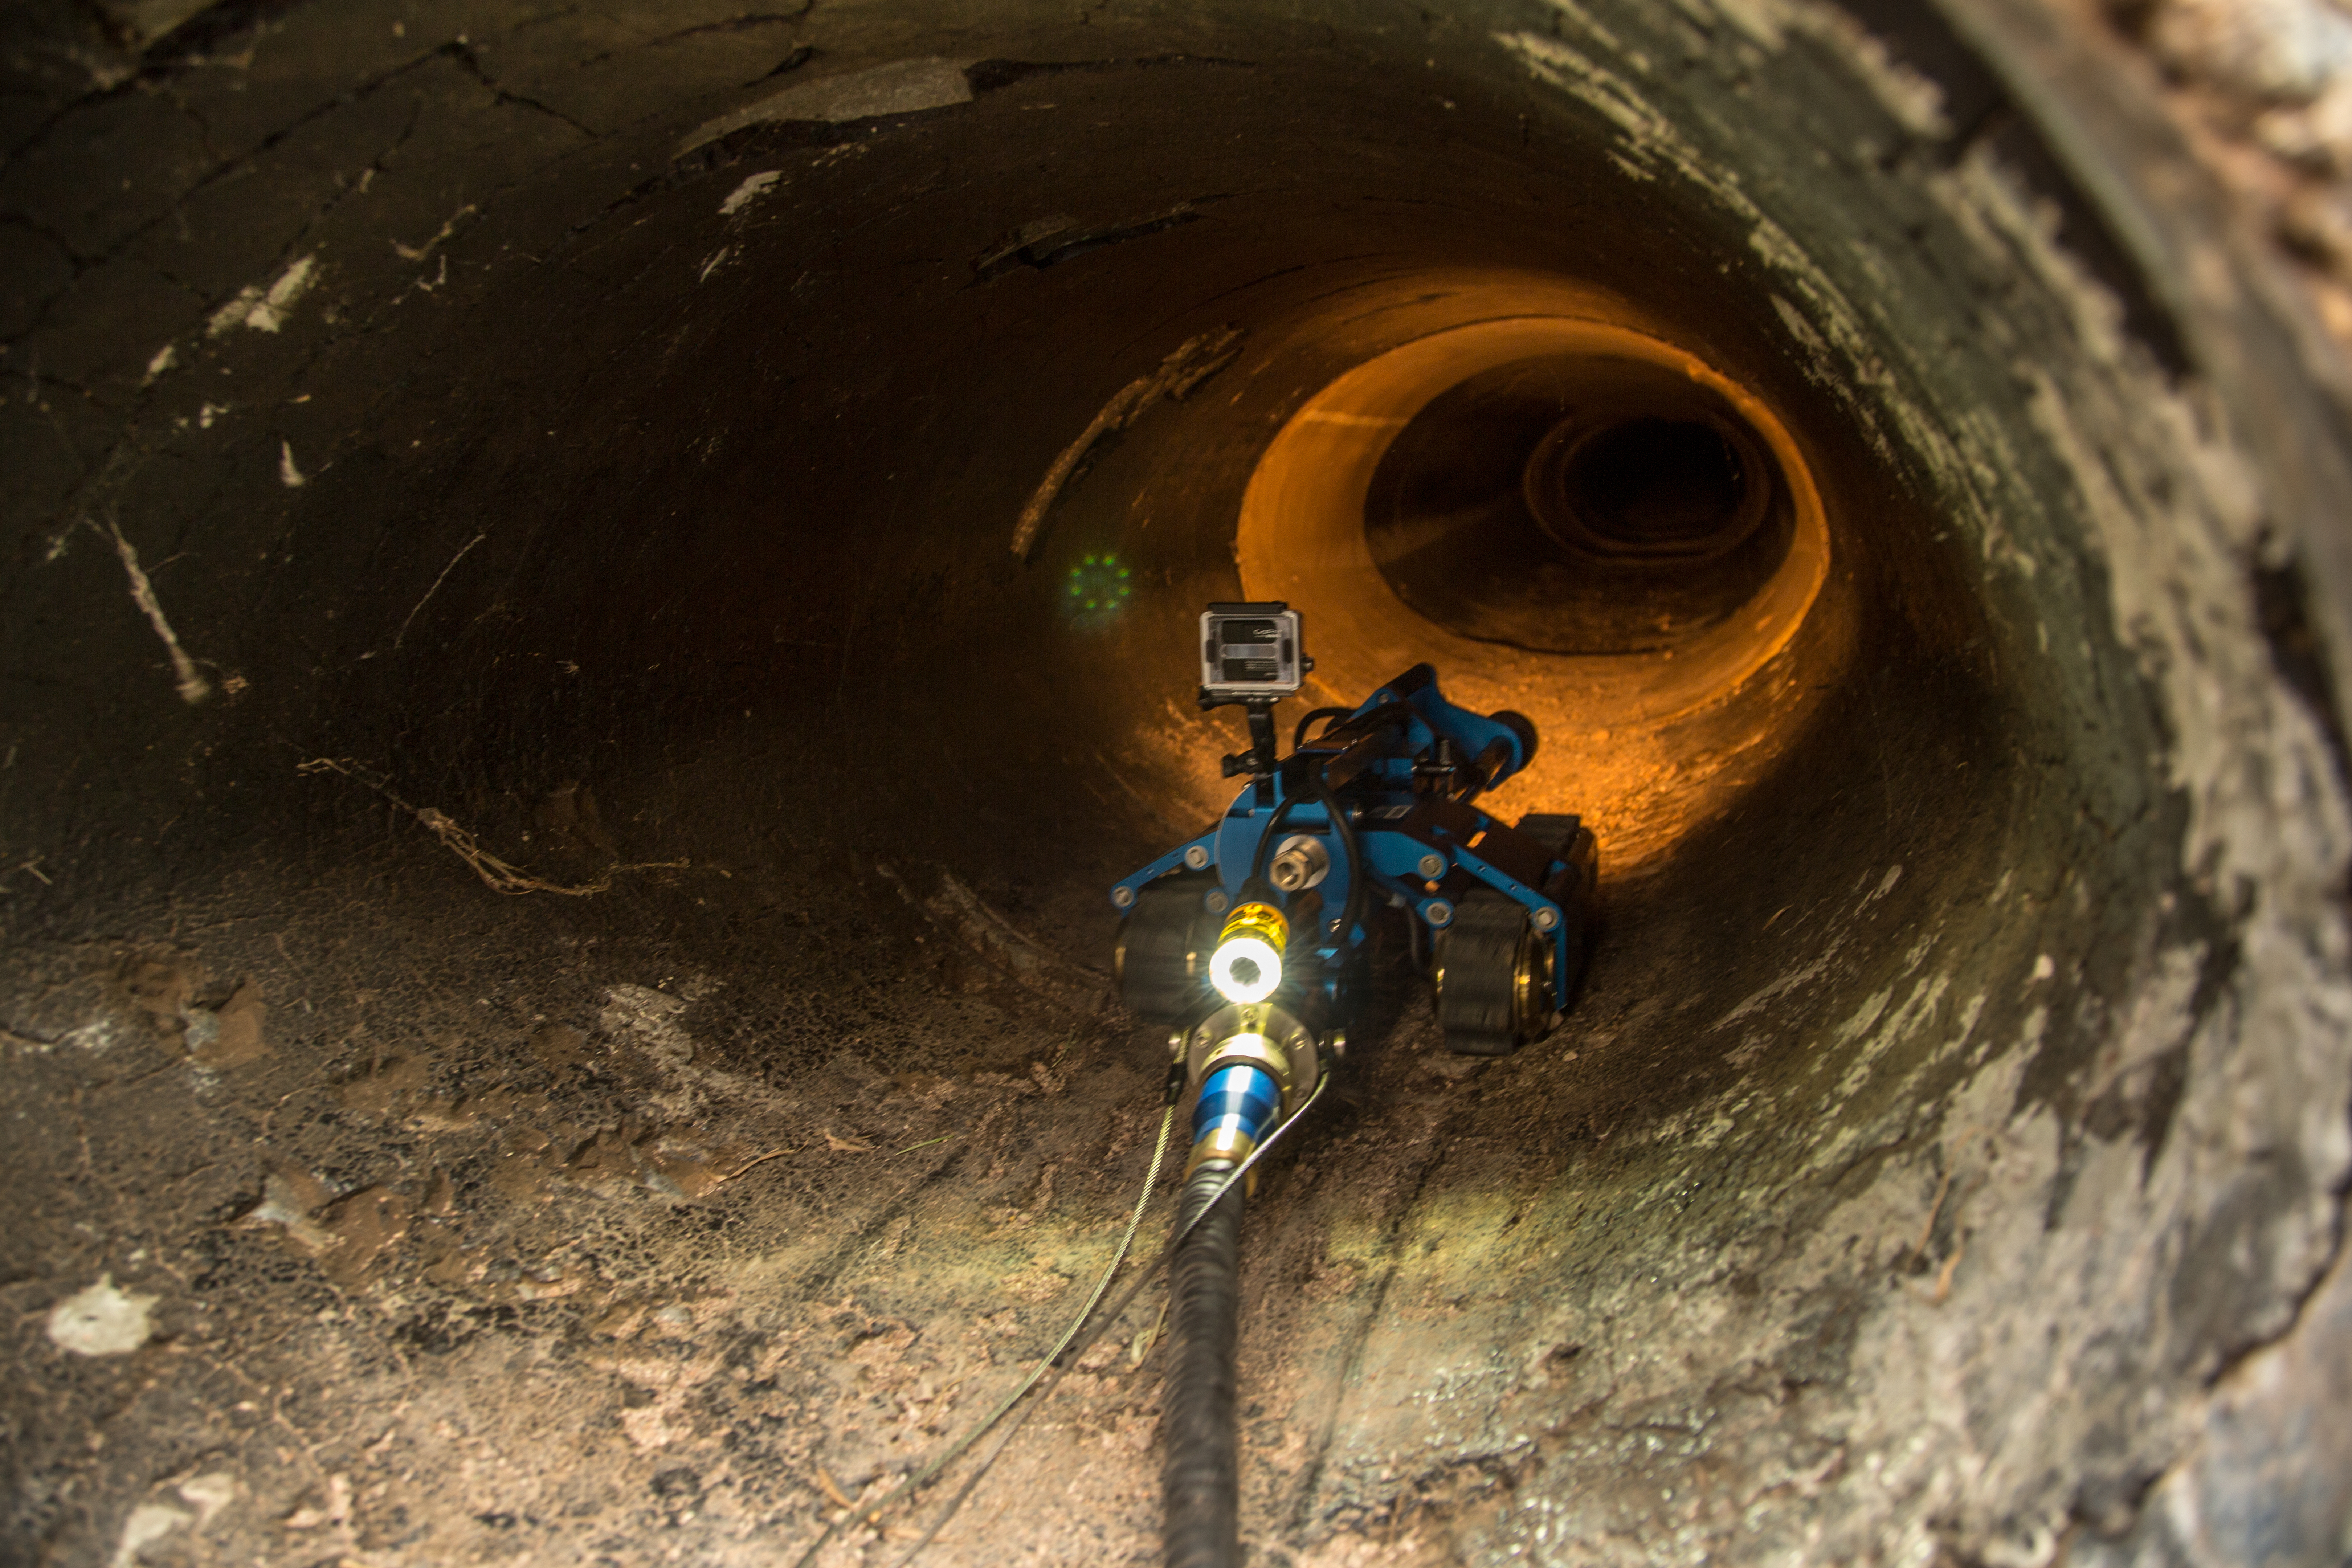 The CBP robot investigates an underground pipe and reports it's data back to agents above ground.